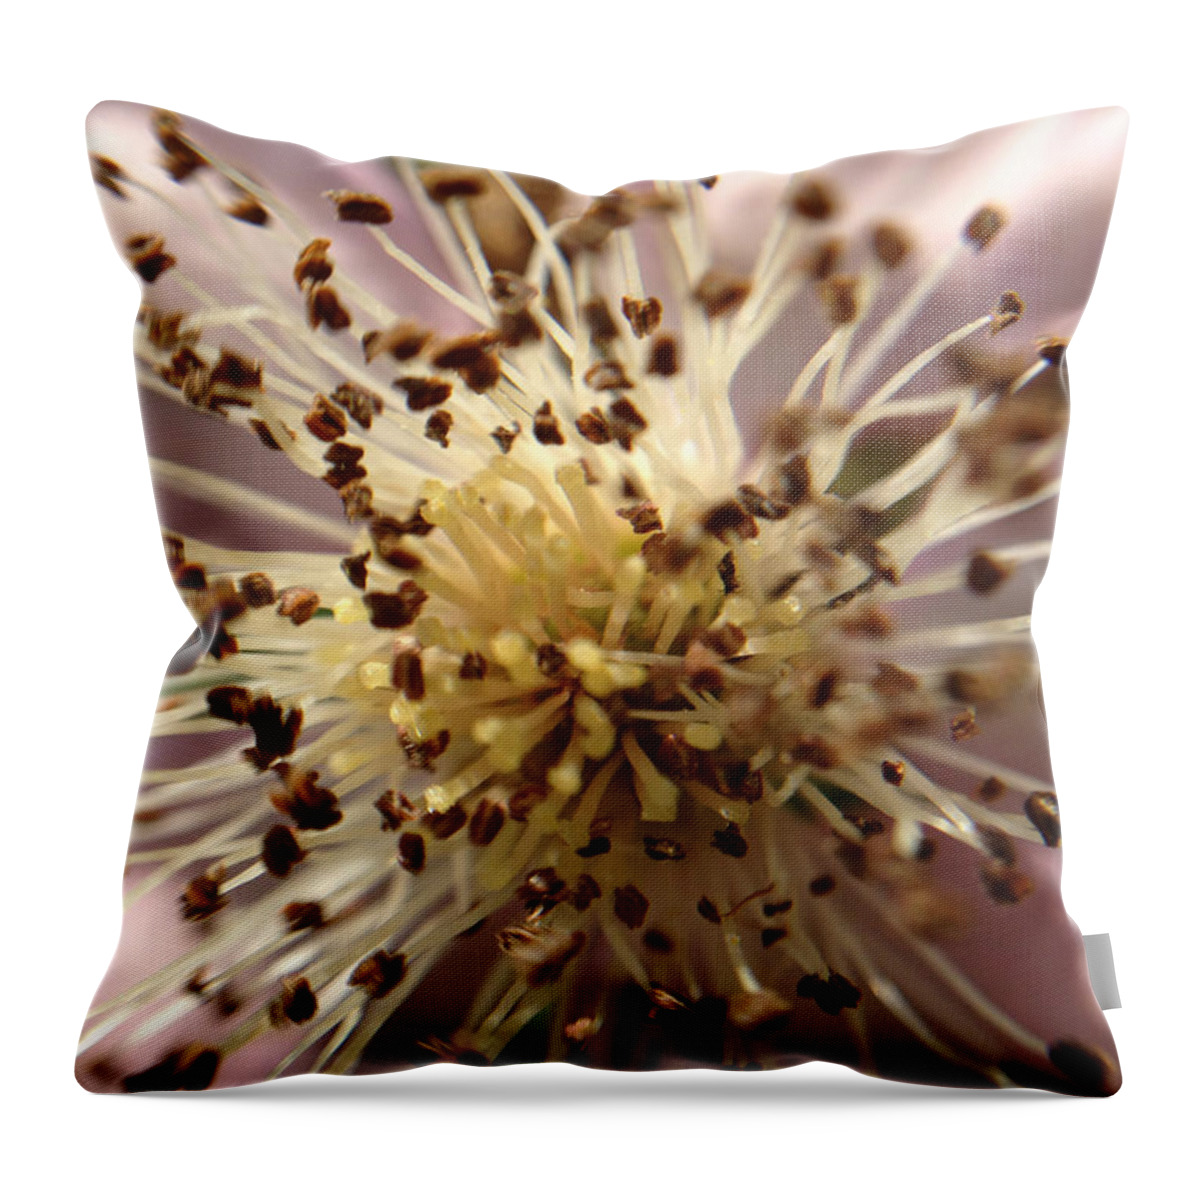 Macro Throw Pillow featuring the photograph Small Seeds by Chriss Pagani